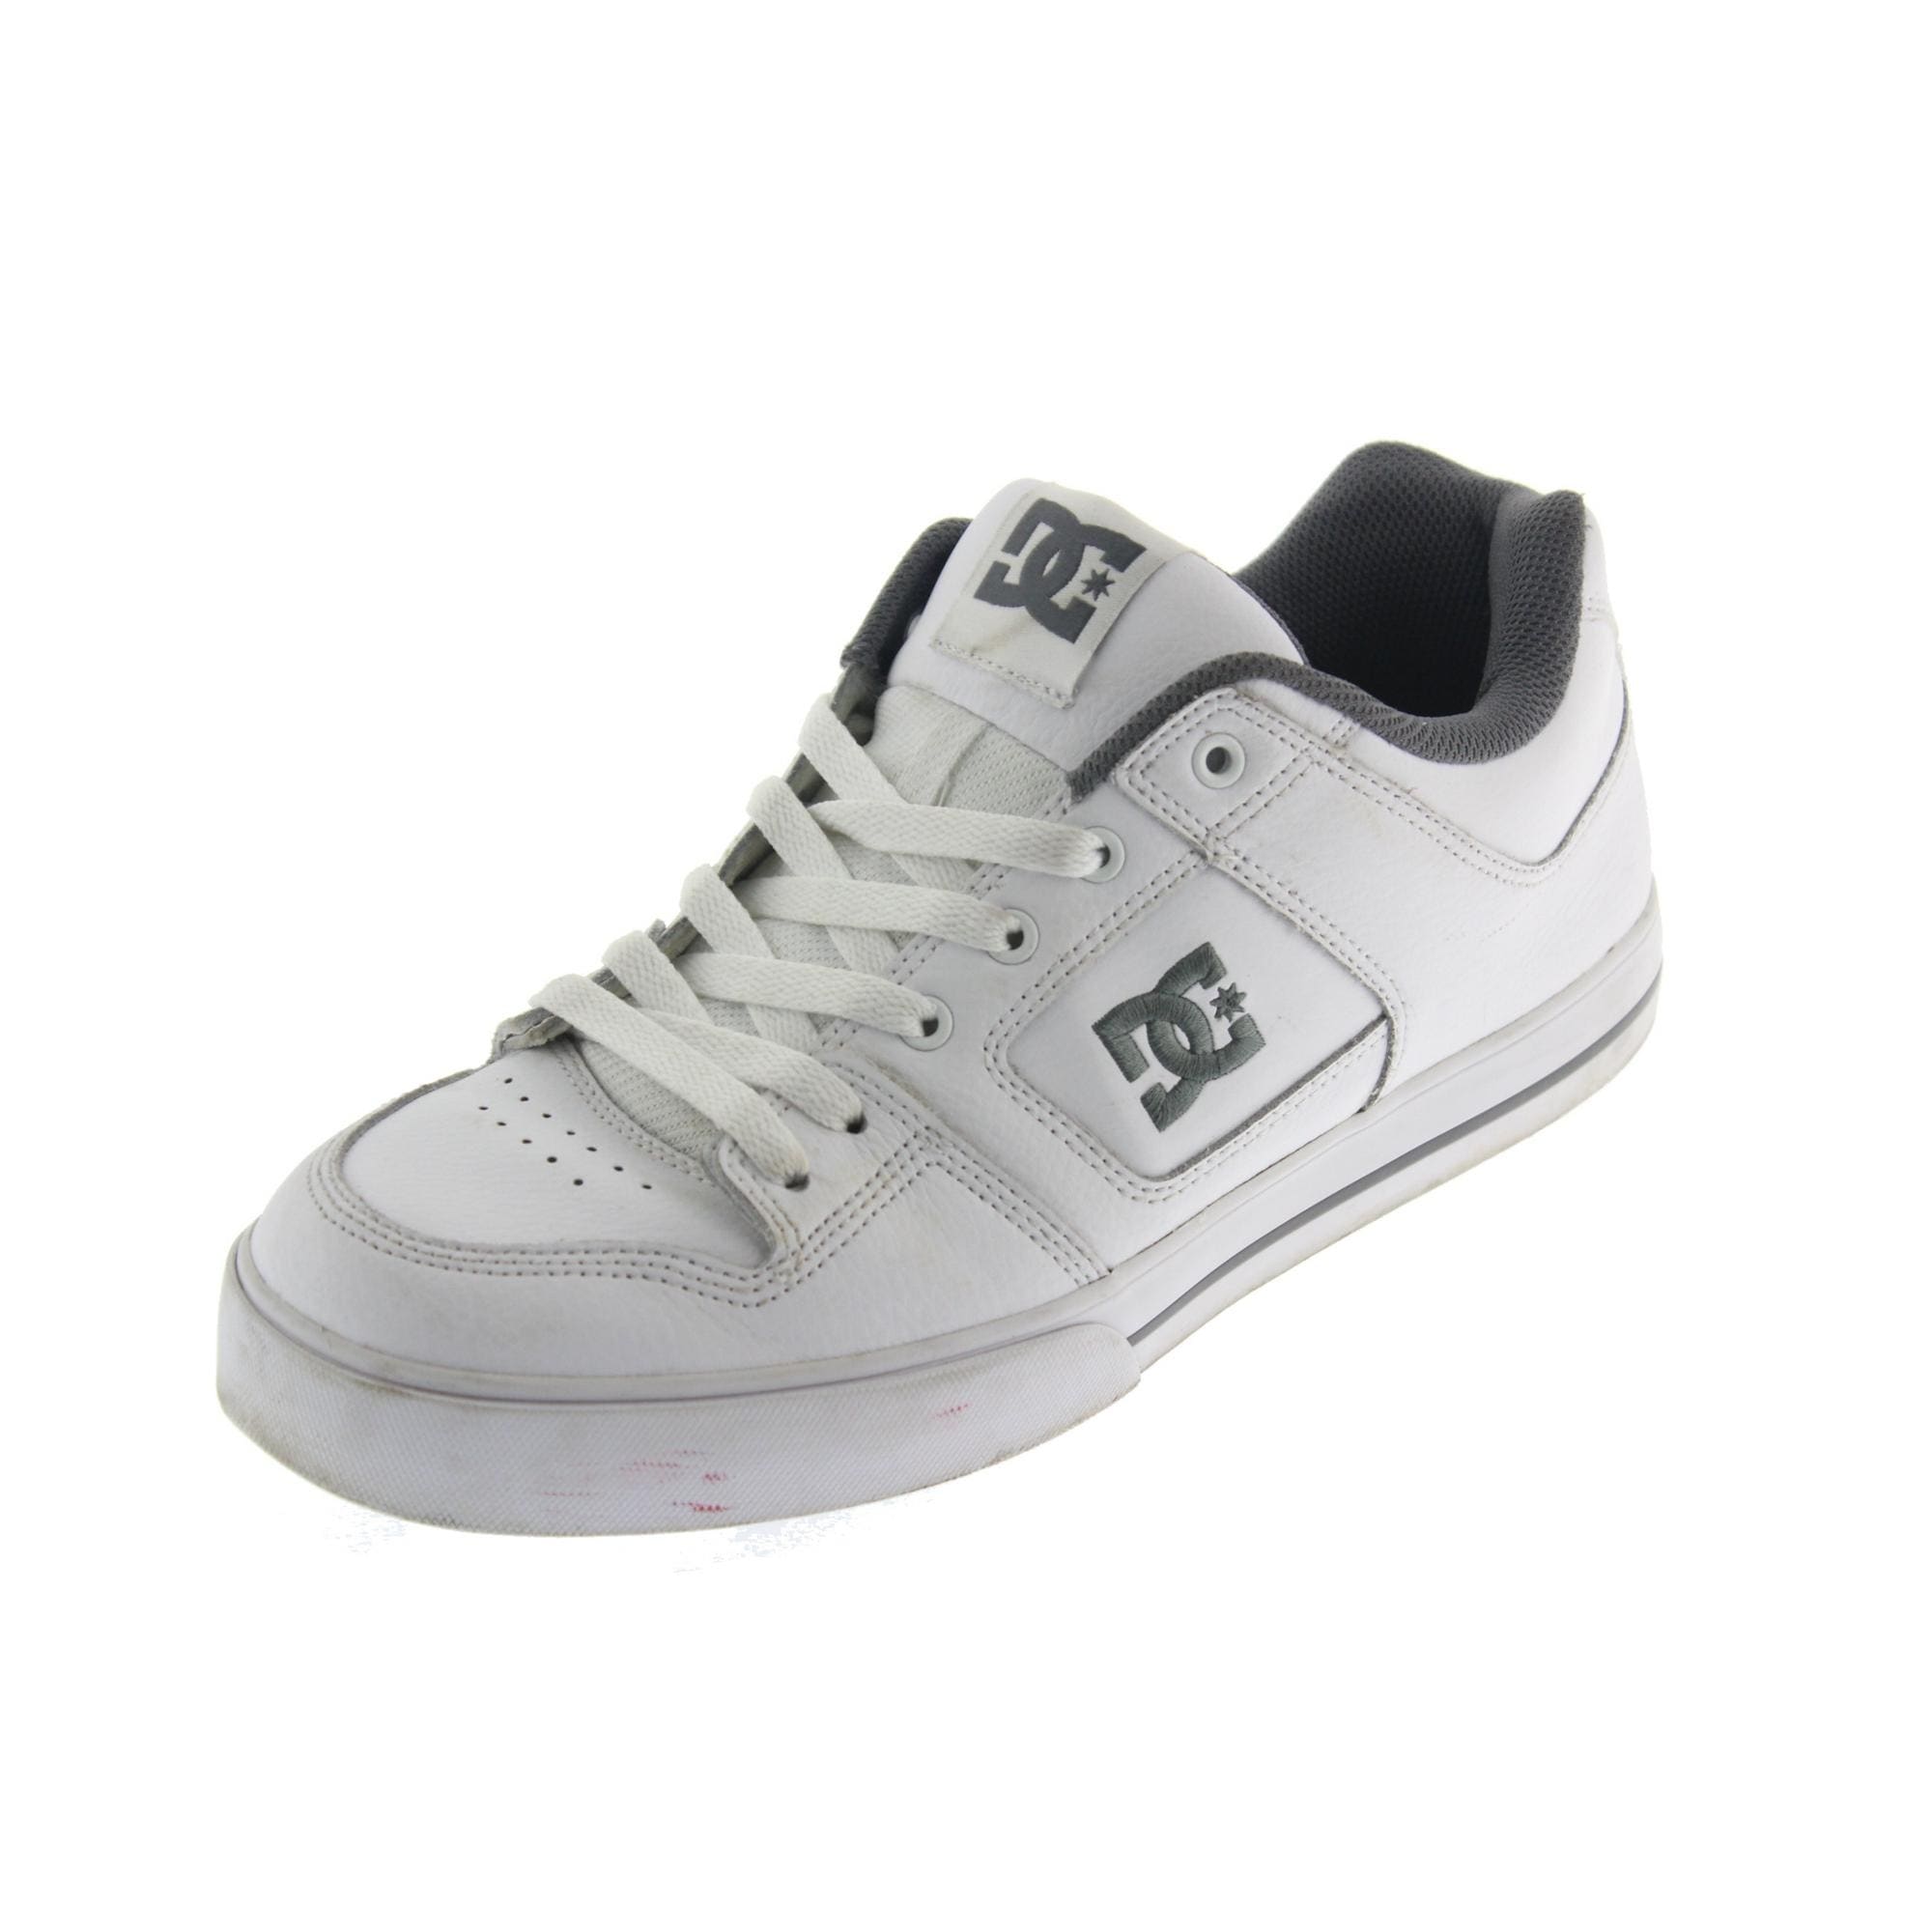 DC Shoes Men's Leather Low Top Classic Skateboarding Sneakers - Overstock - 31644387